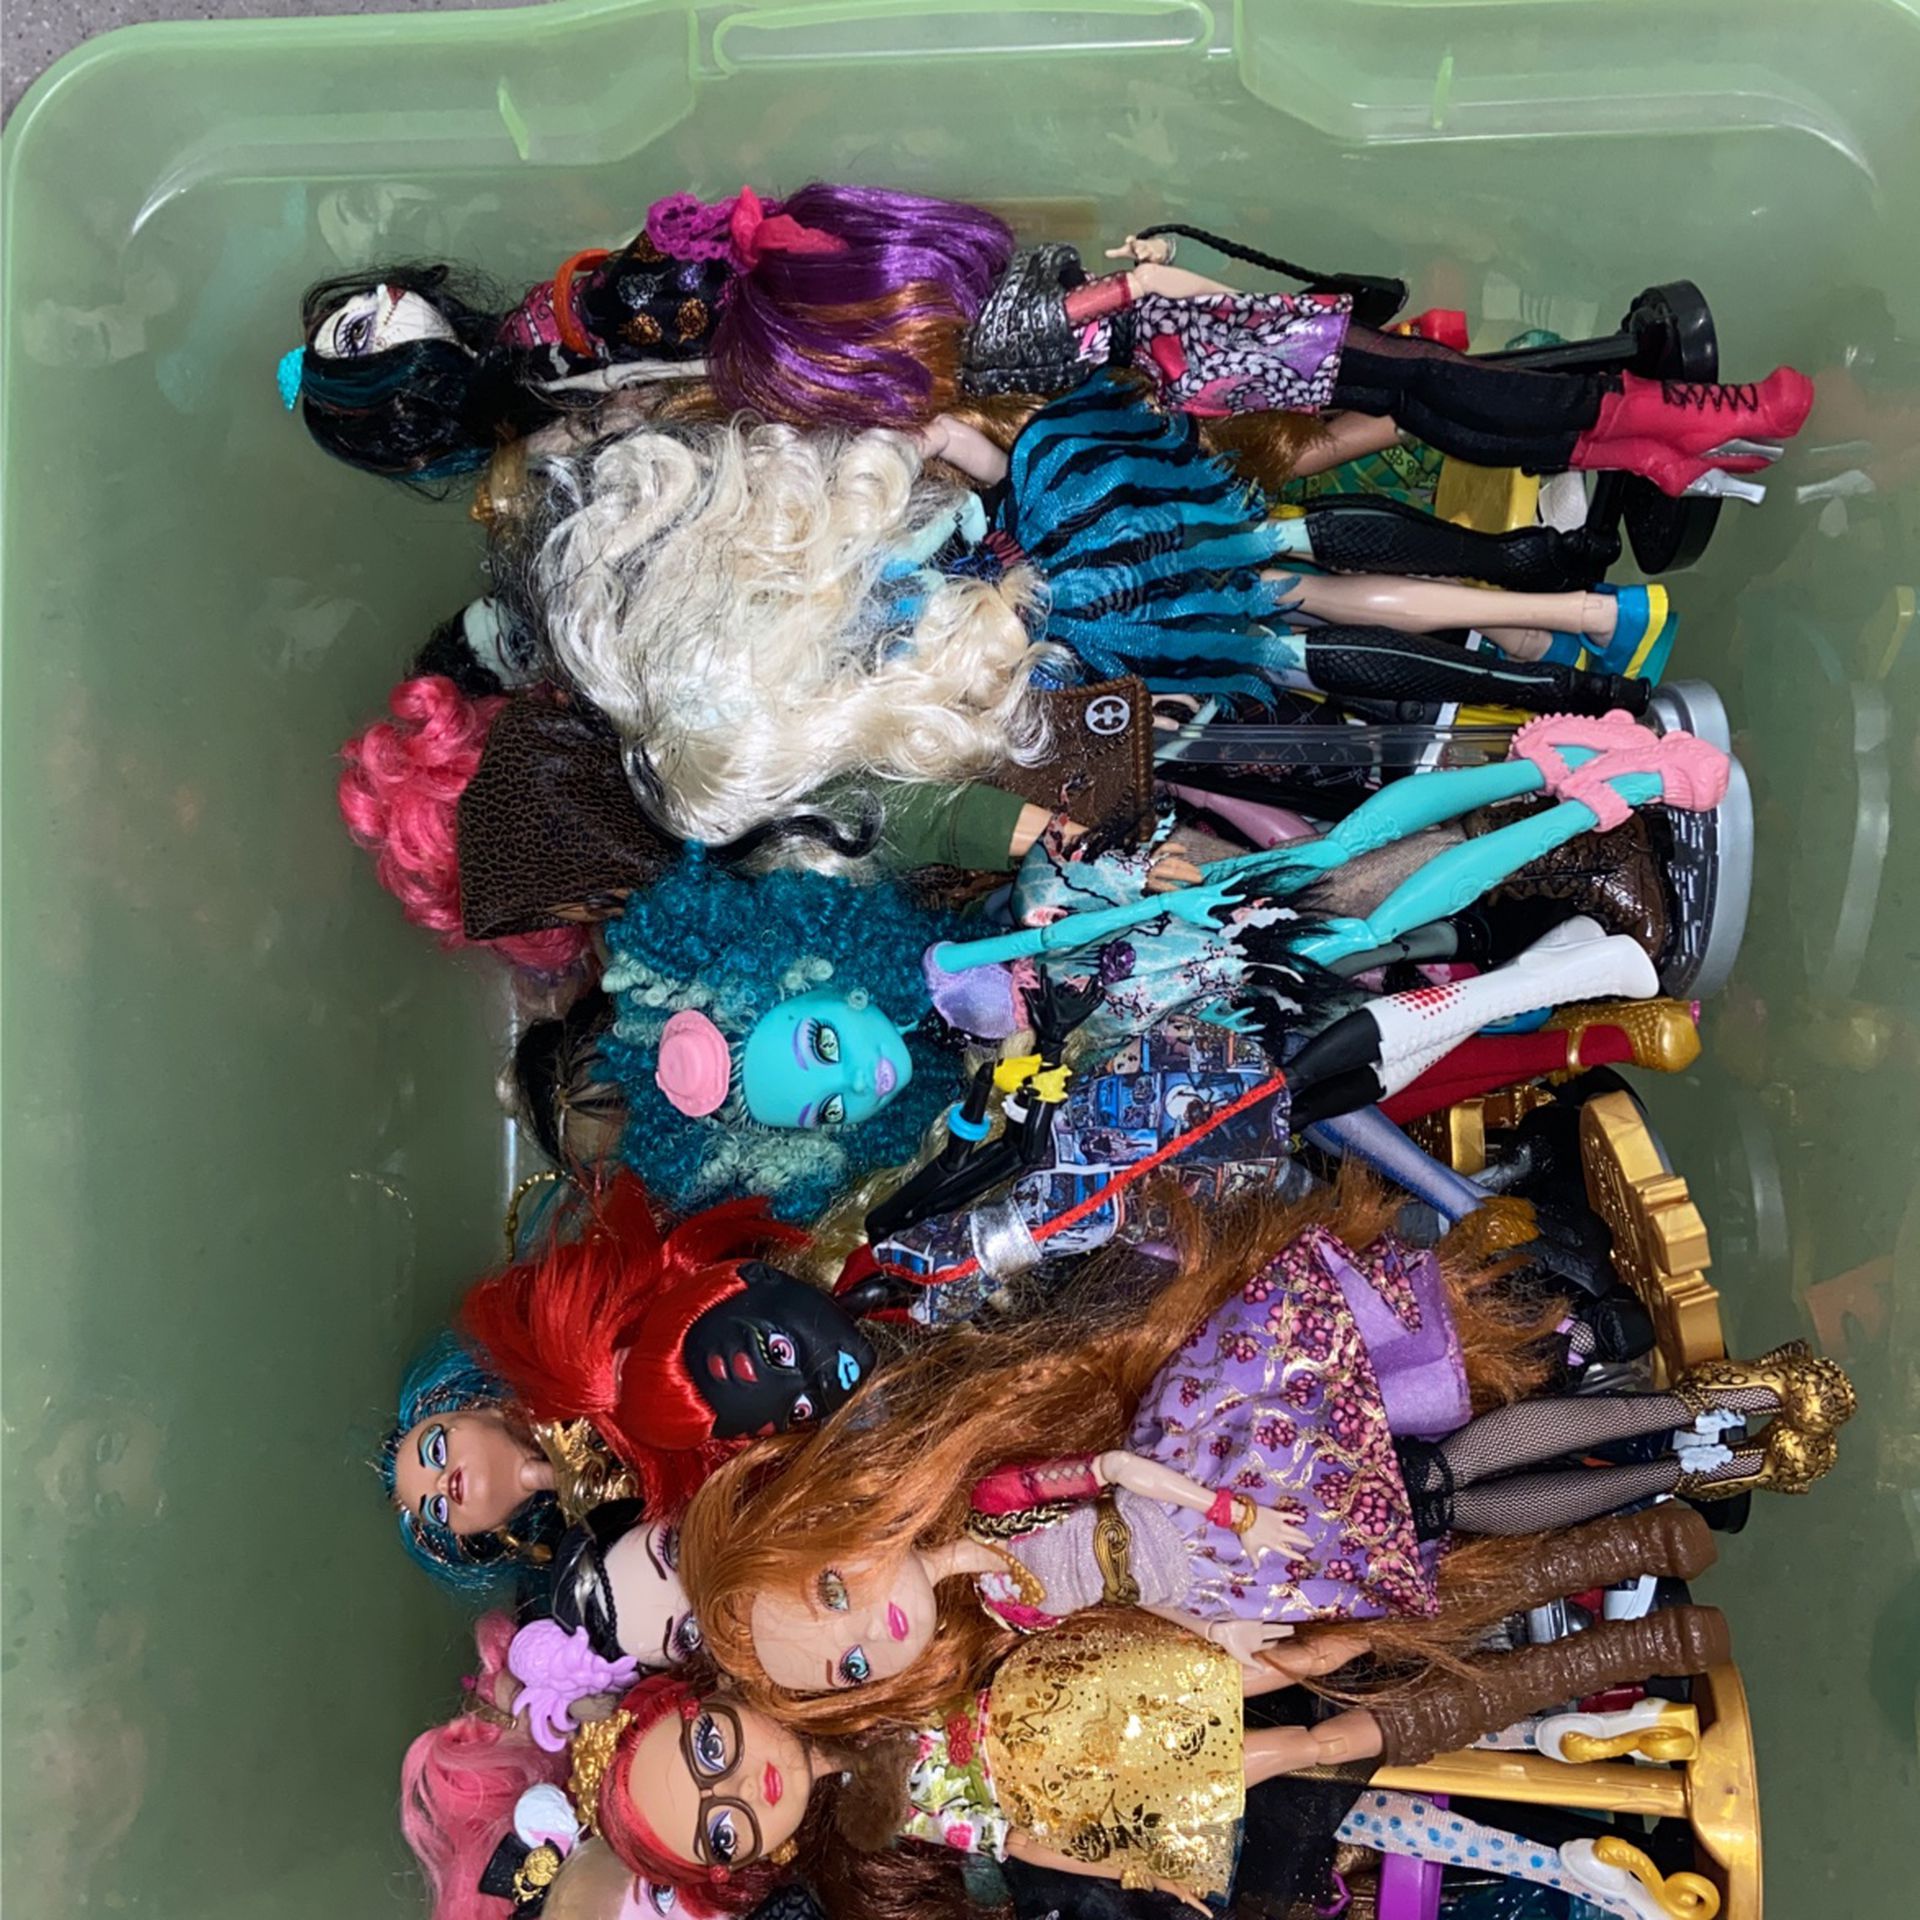 Monster high And ever after high dolls in great condition like new